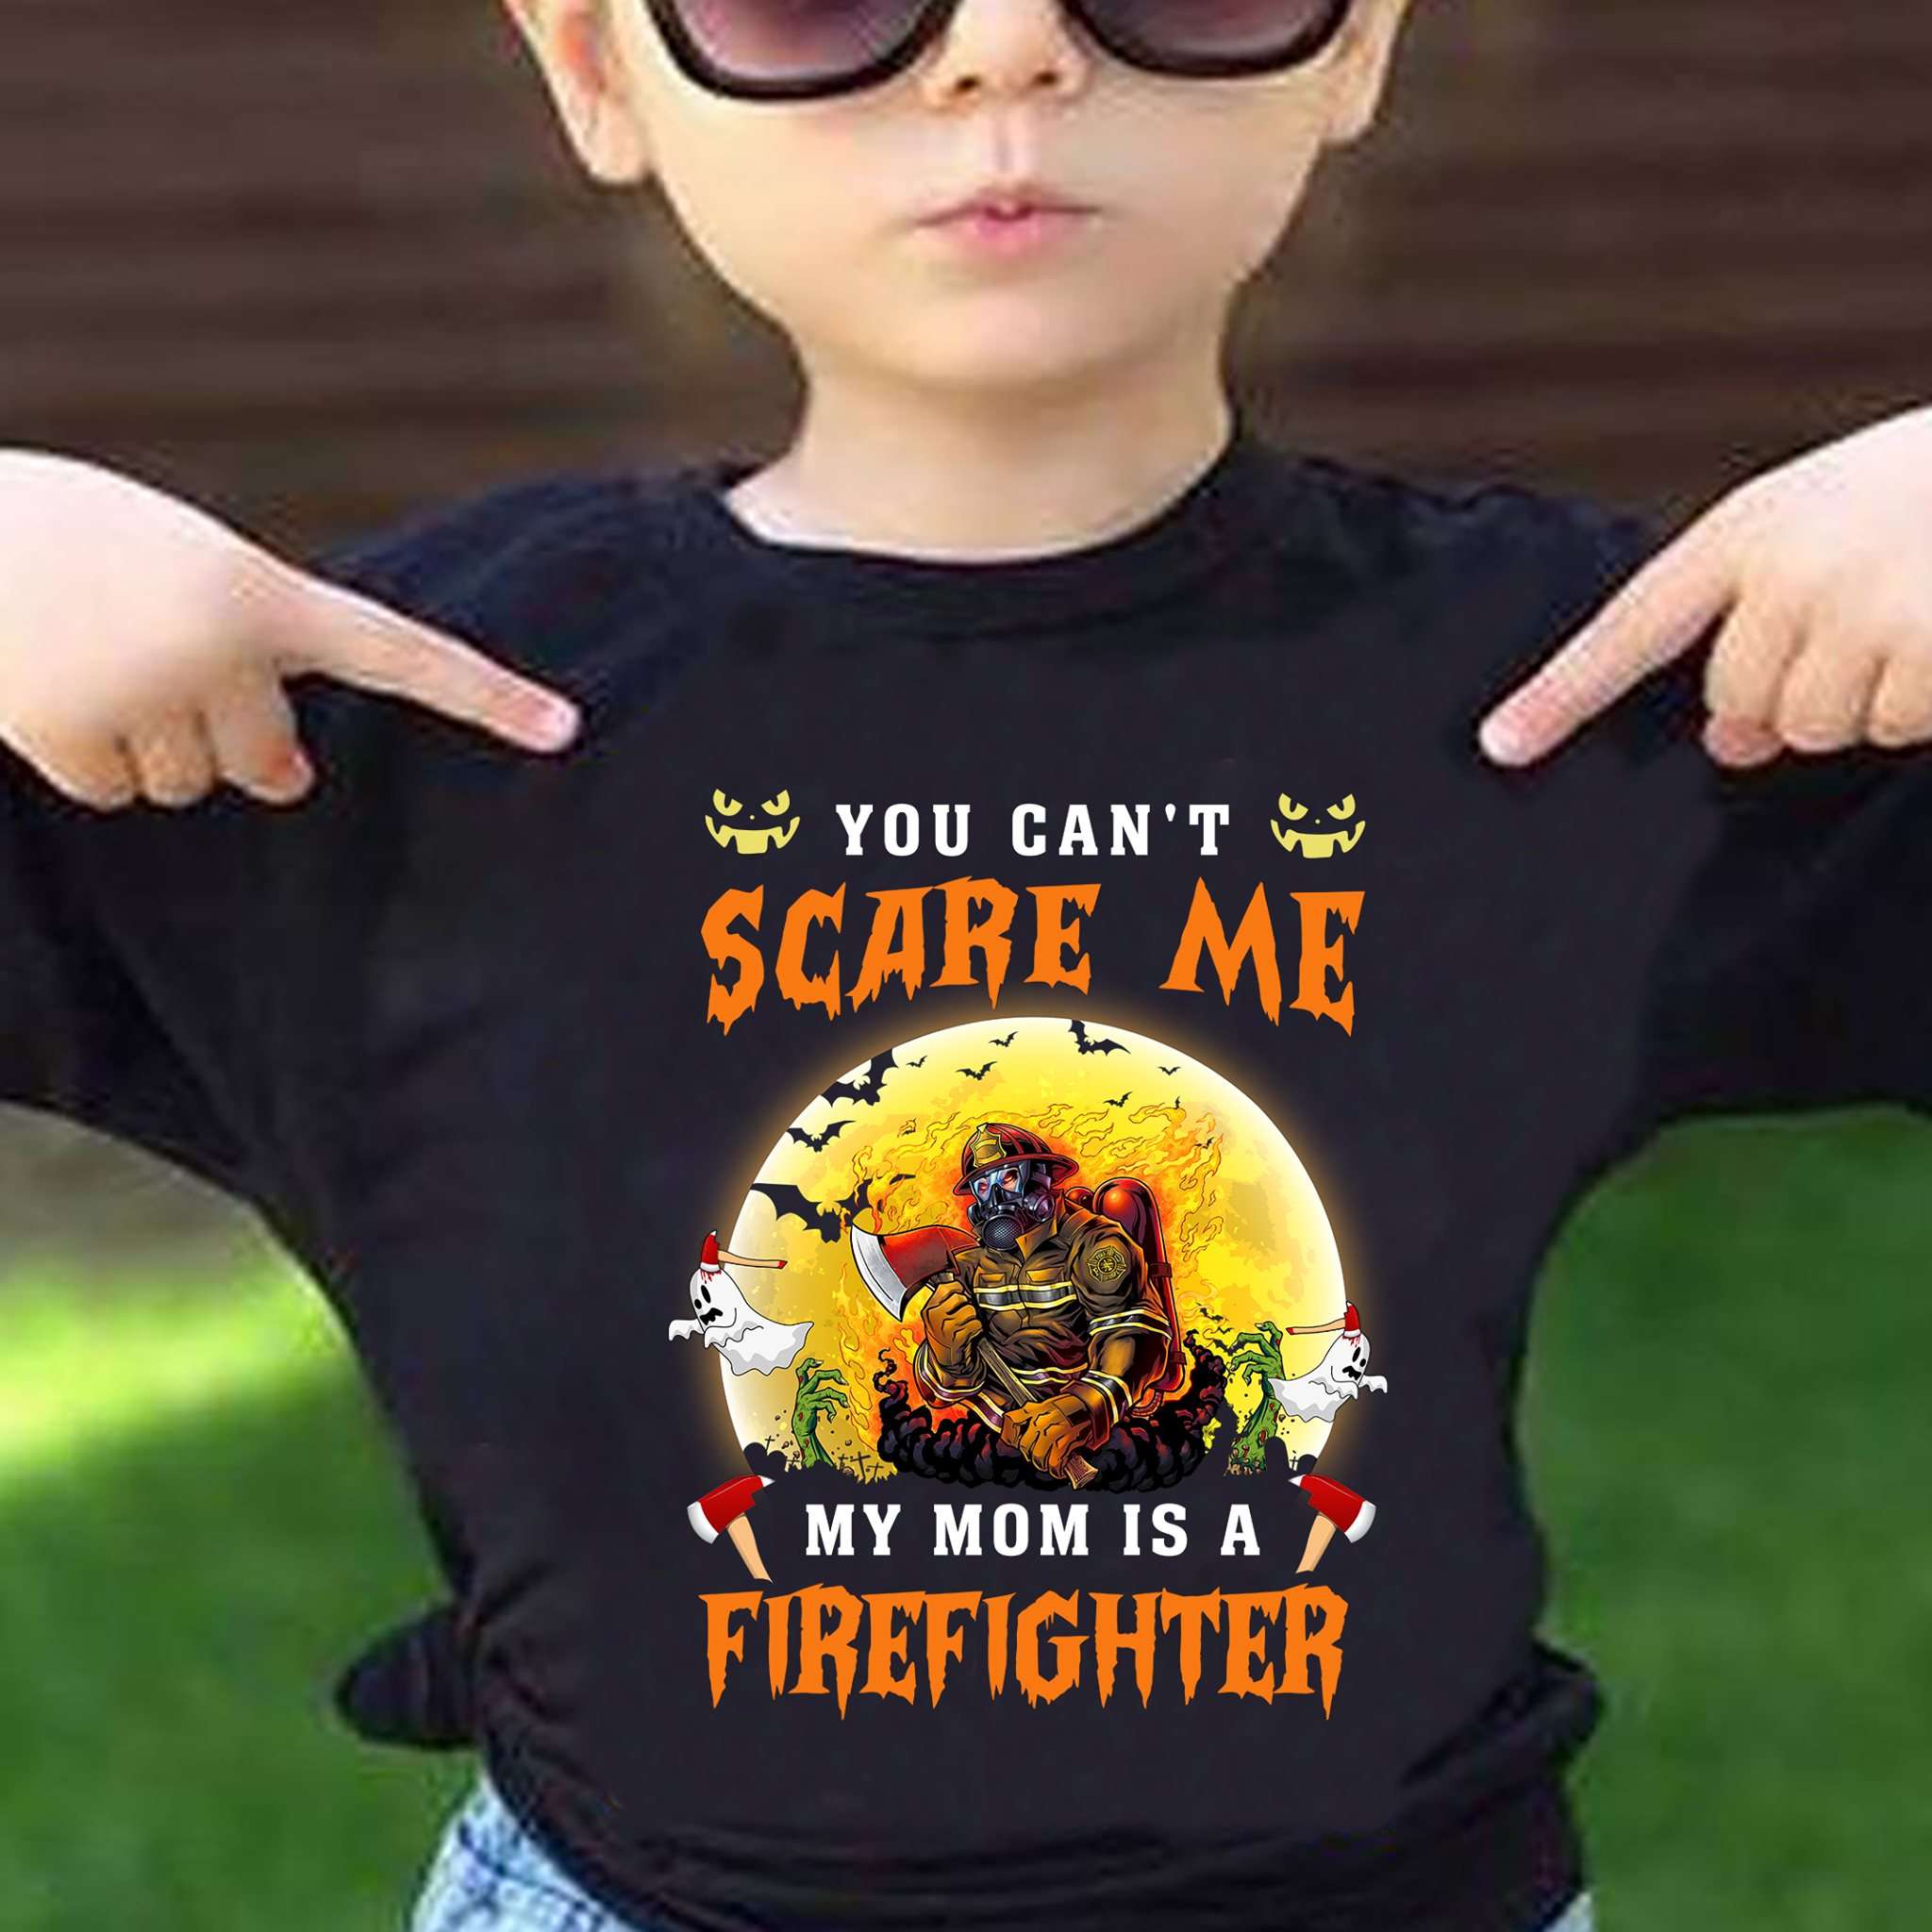 Firefighter Mother, Halloween Costume - You can't scare me my mom is a firefighter